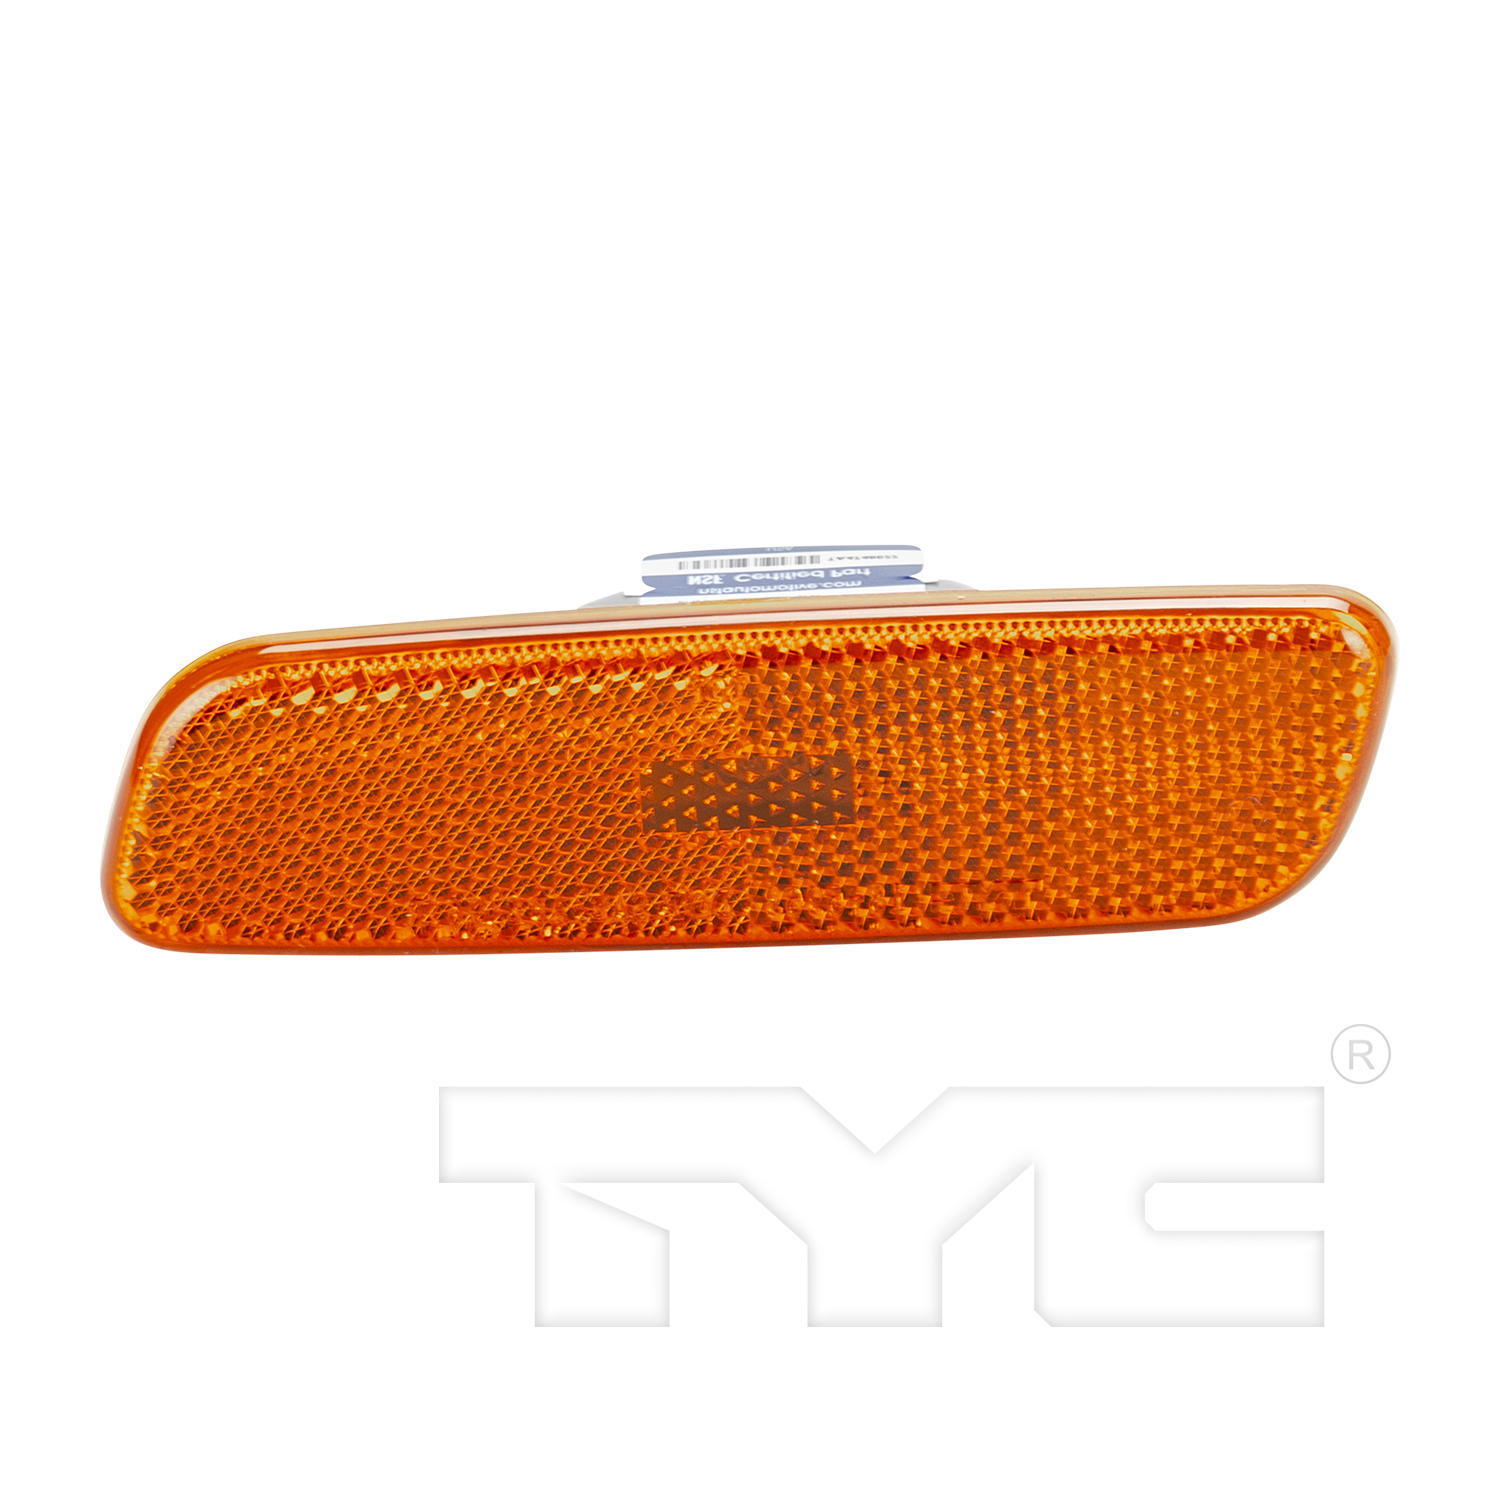 Aftermarket LAMPS for TOYOTA - PRIUS, PRIUS,01-03,LT Front marker lamp assy